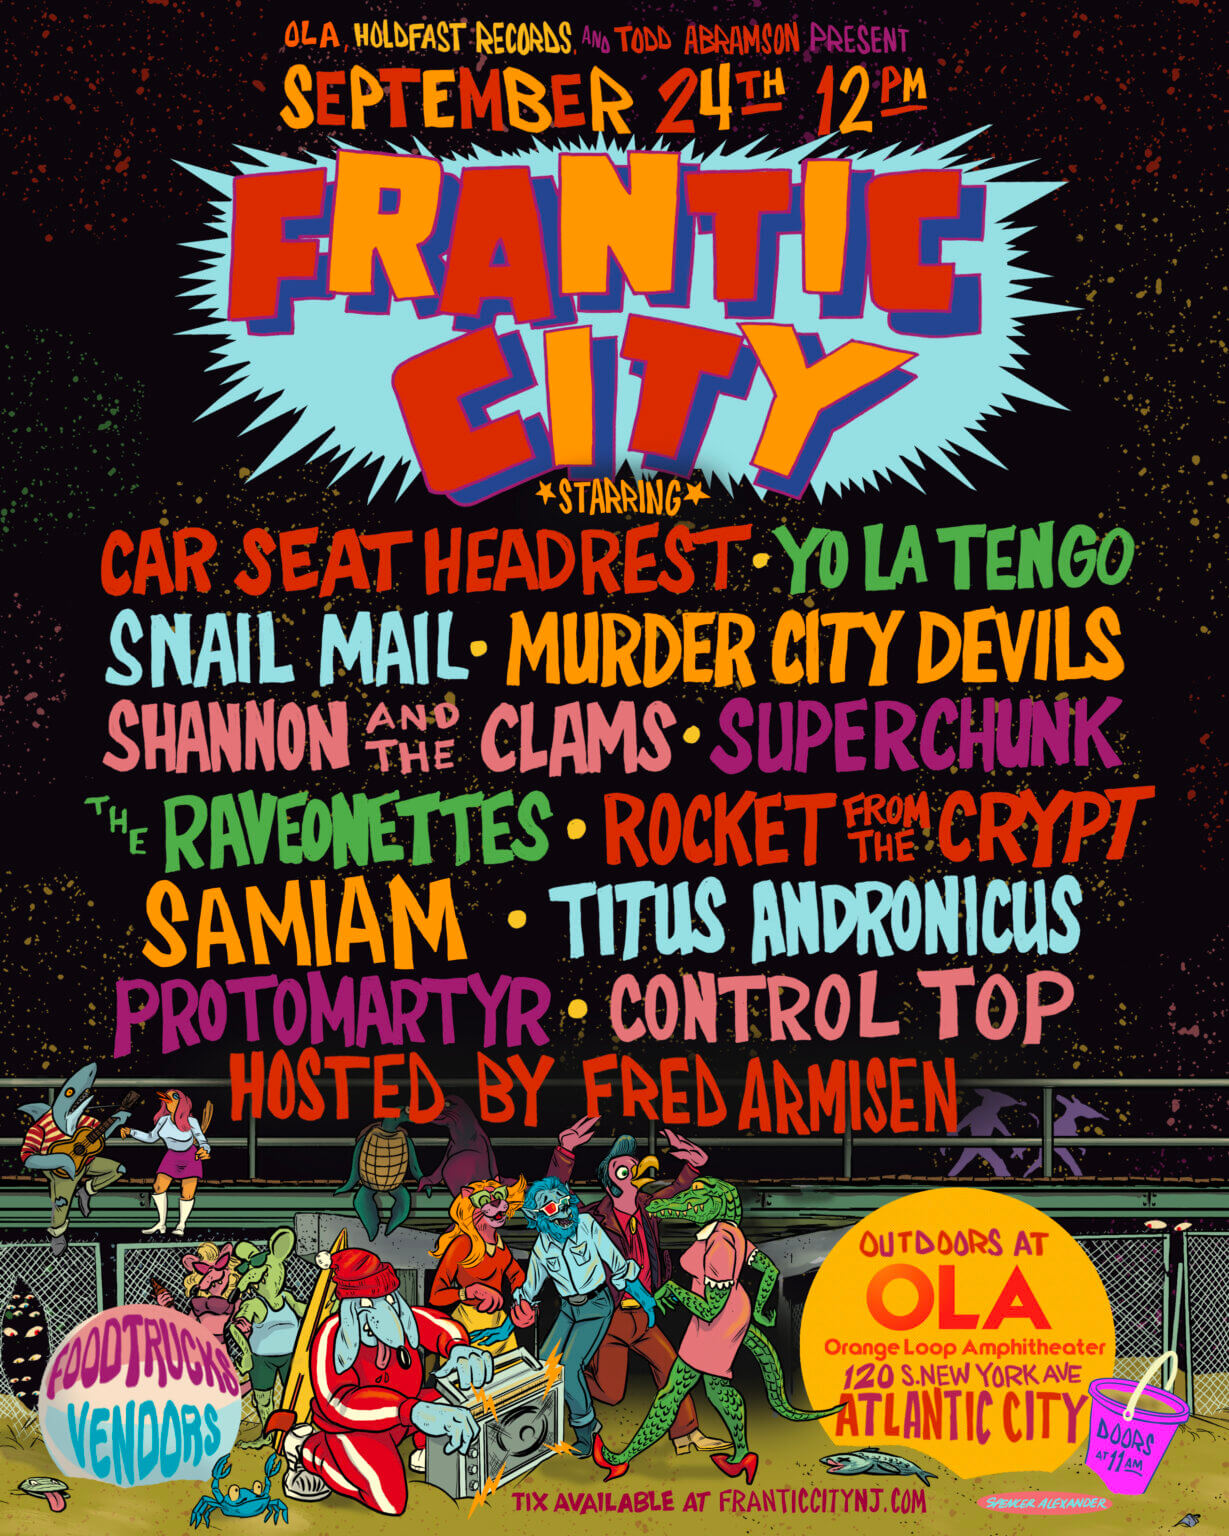 Frantic City 2022 Reveals inaugural Line-Up. The festival includes sets by Car Seat Headrest, Yo La Tengo, Snail Mail, Superchunk and more